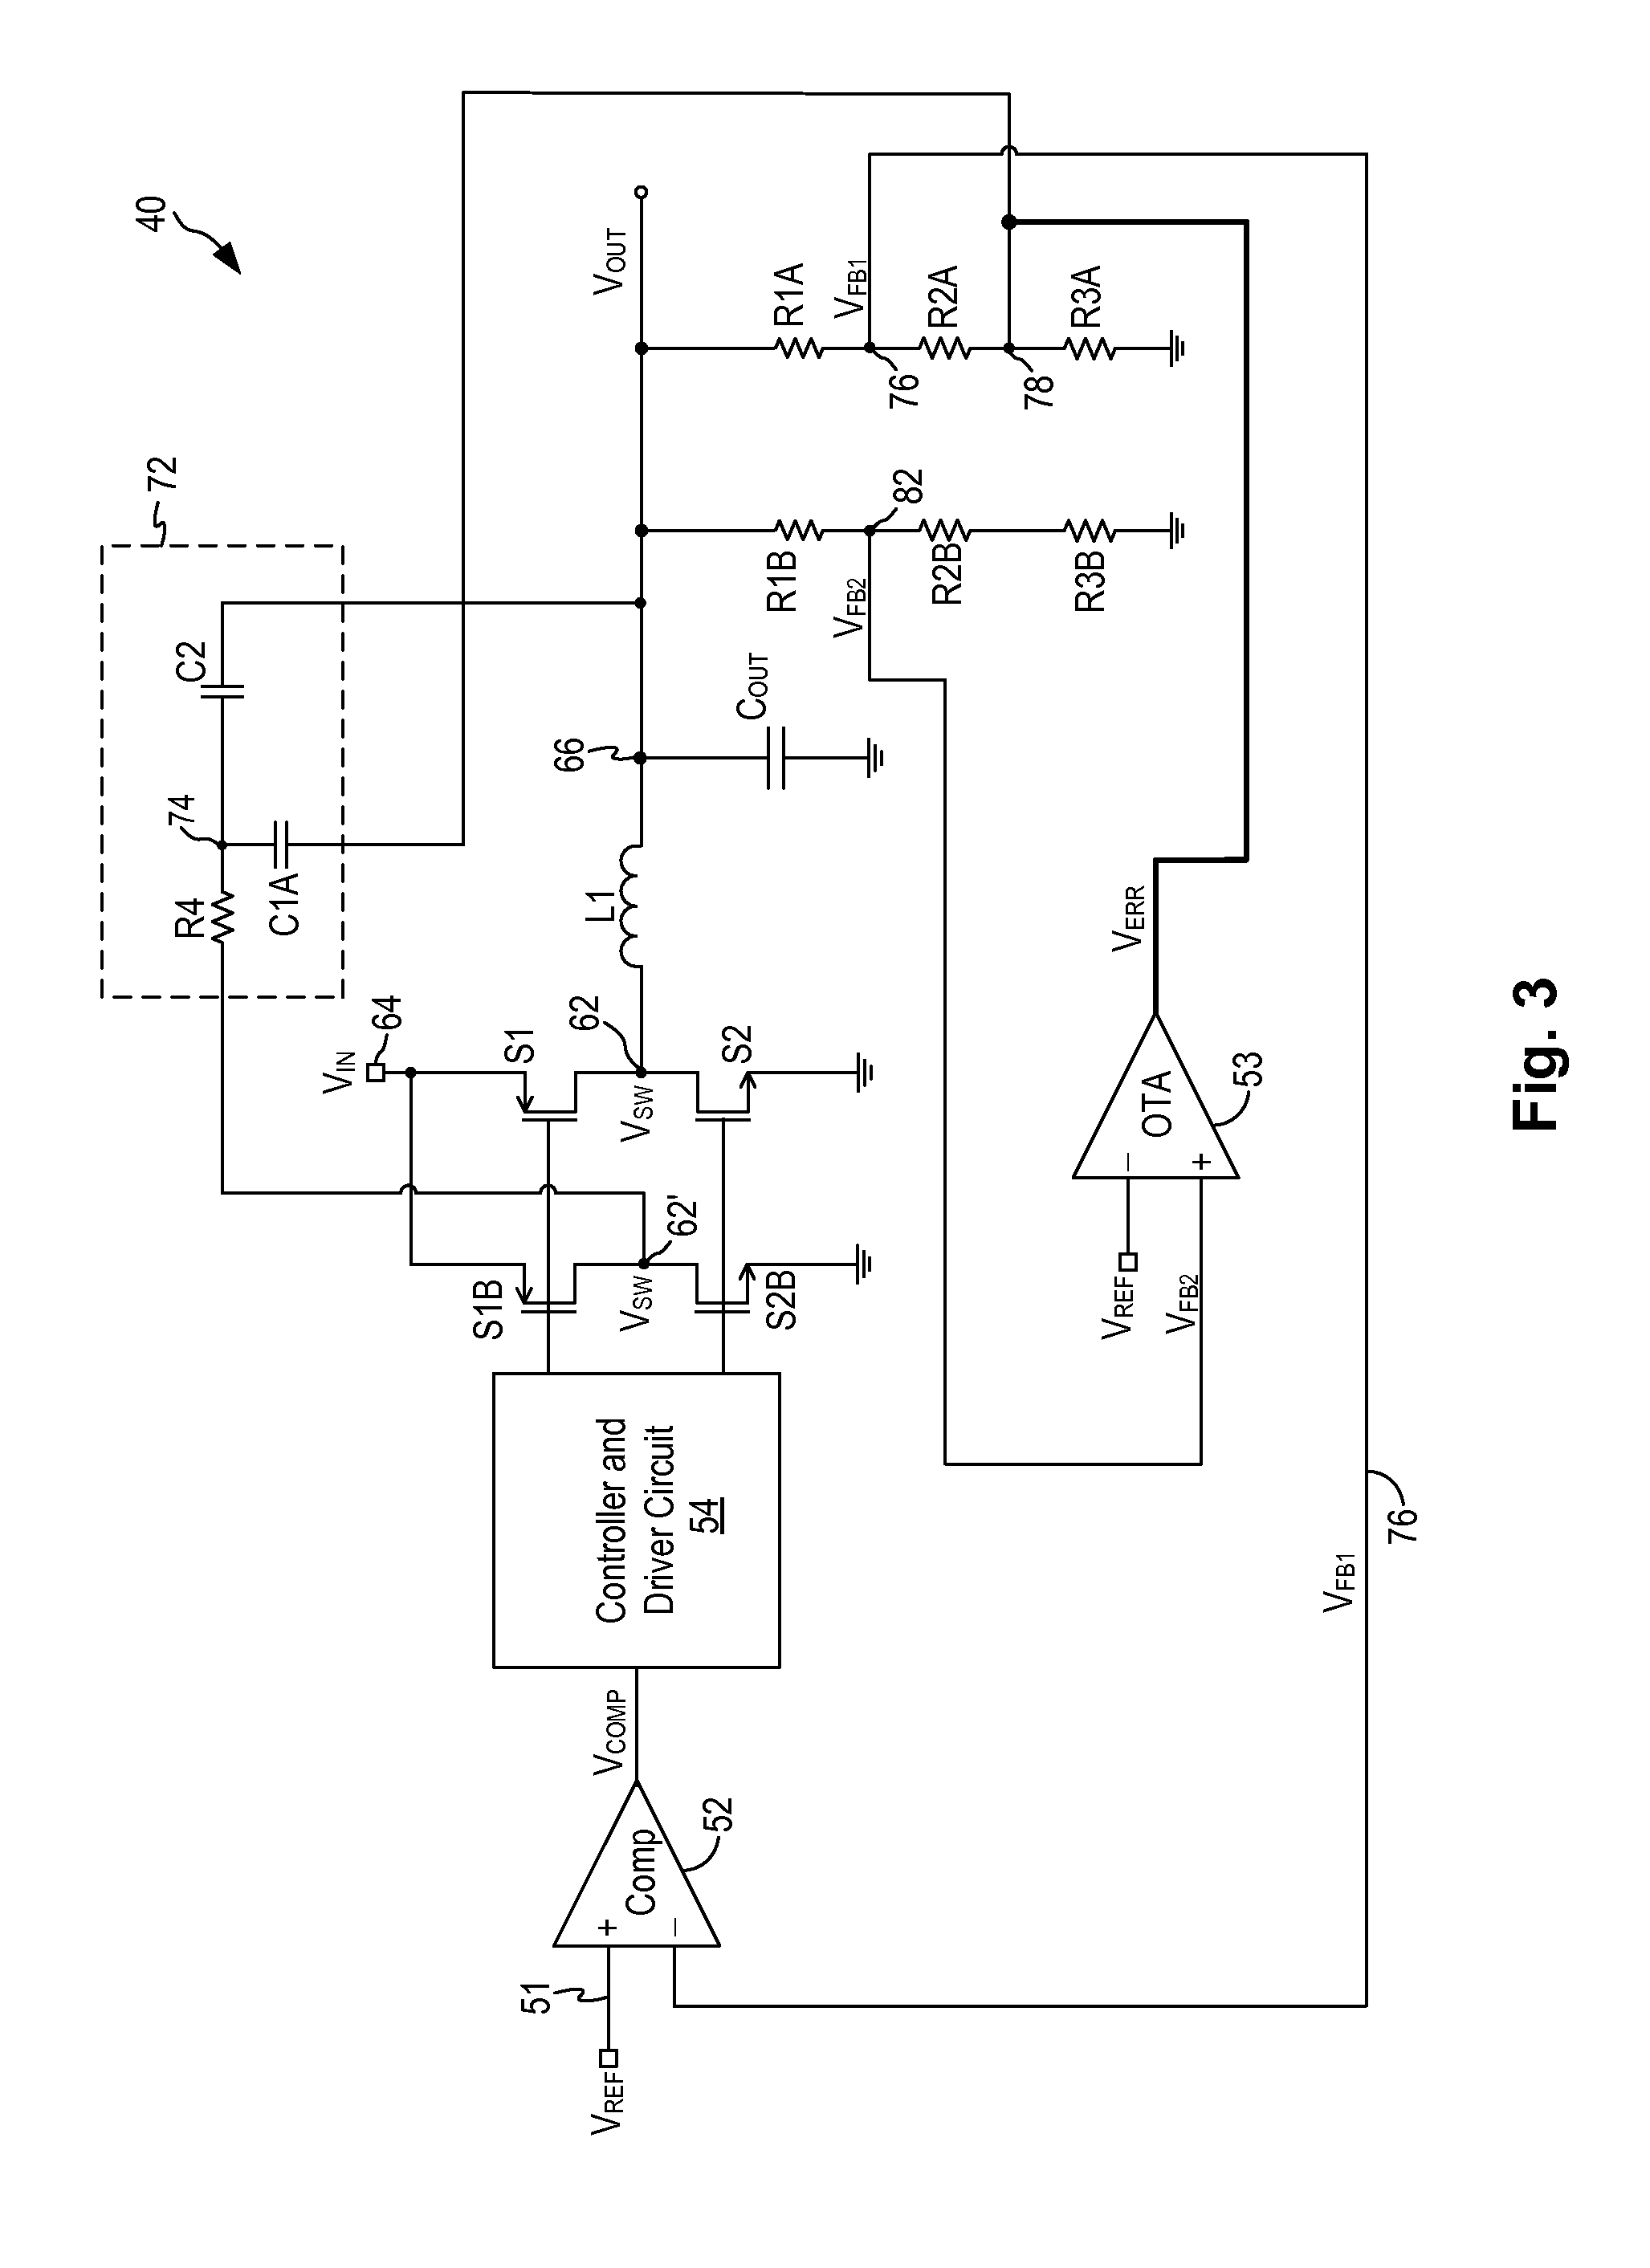 Buck dc-dc converter with improved accuracy